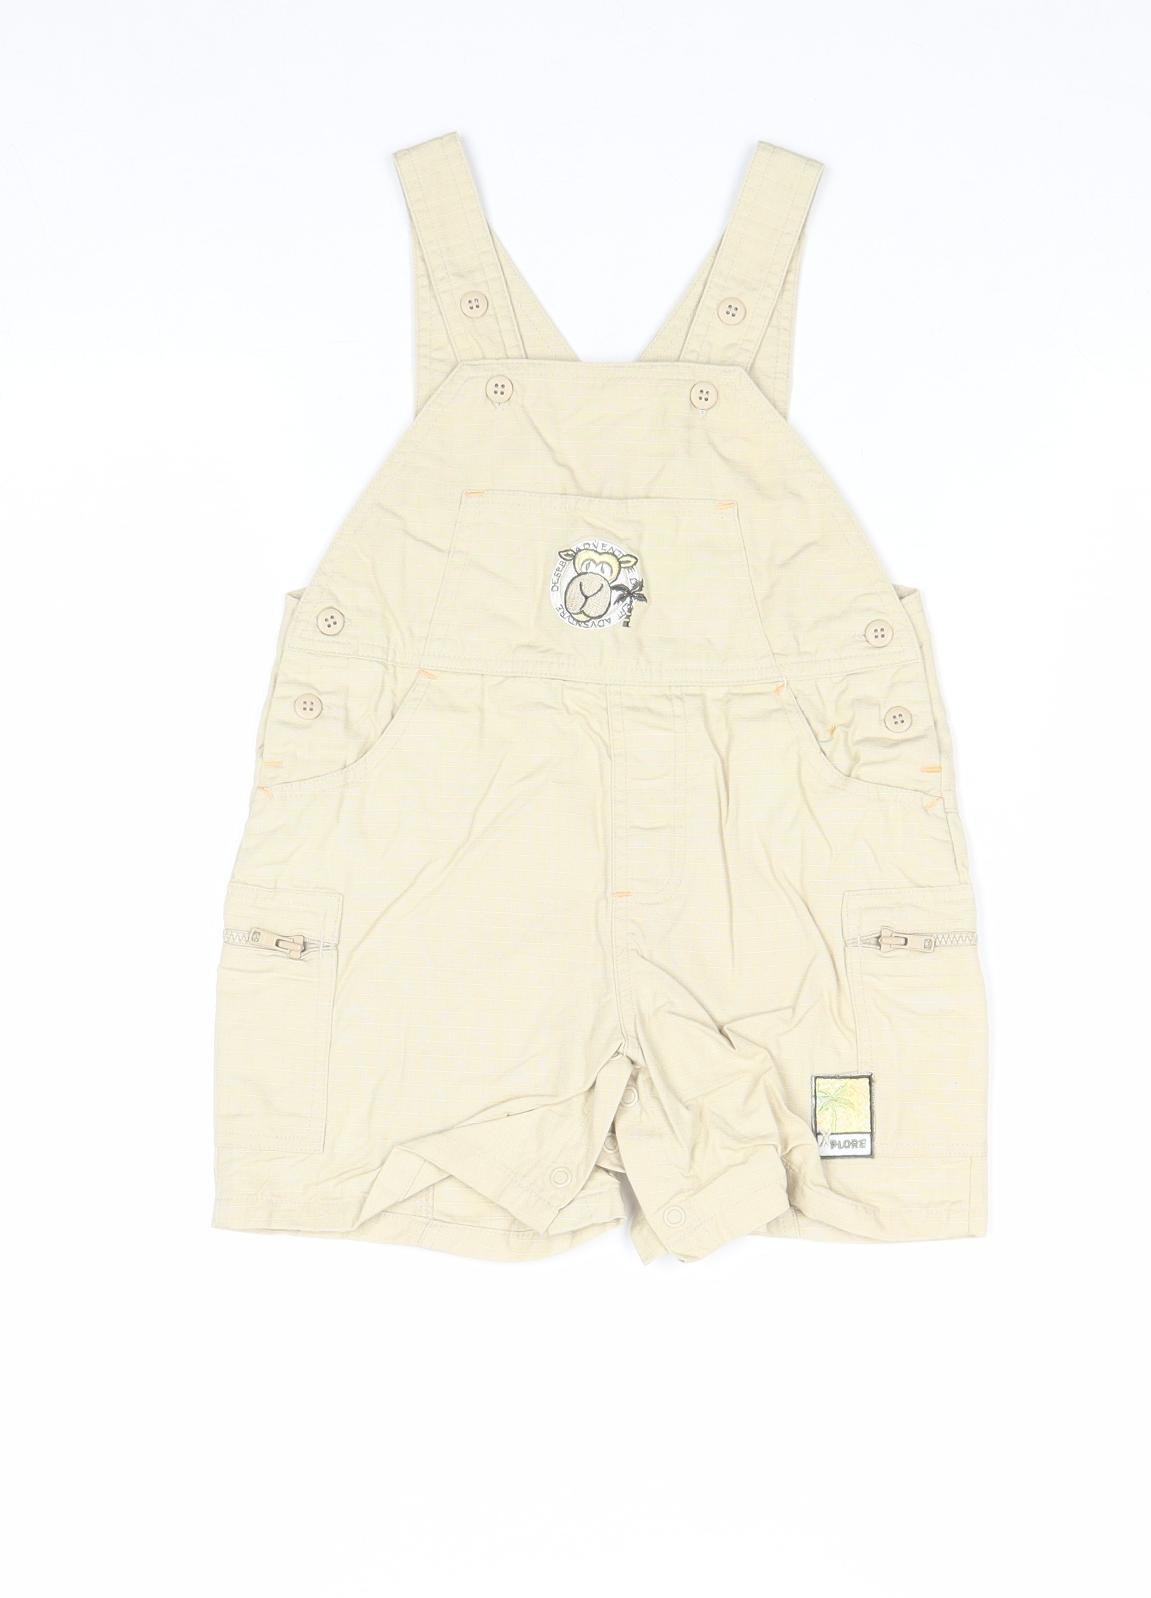 George Boys Beige 100% Cotton Dungaree One-Piece Size 6-9 Months Buckle